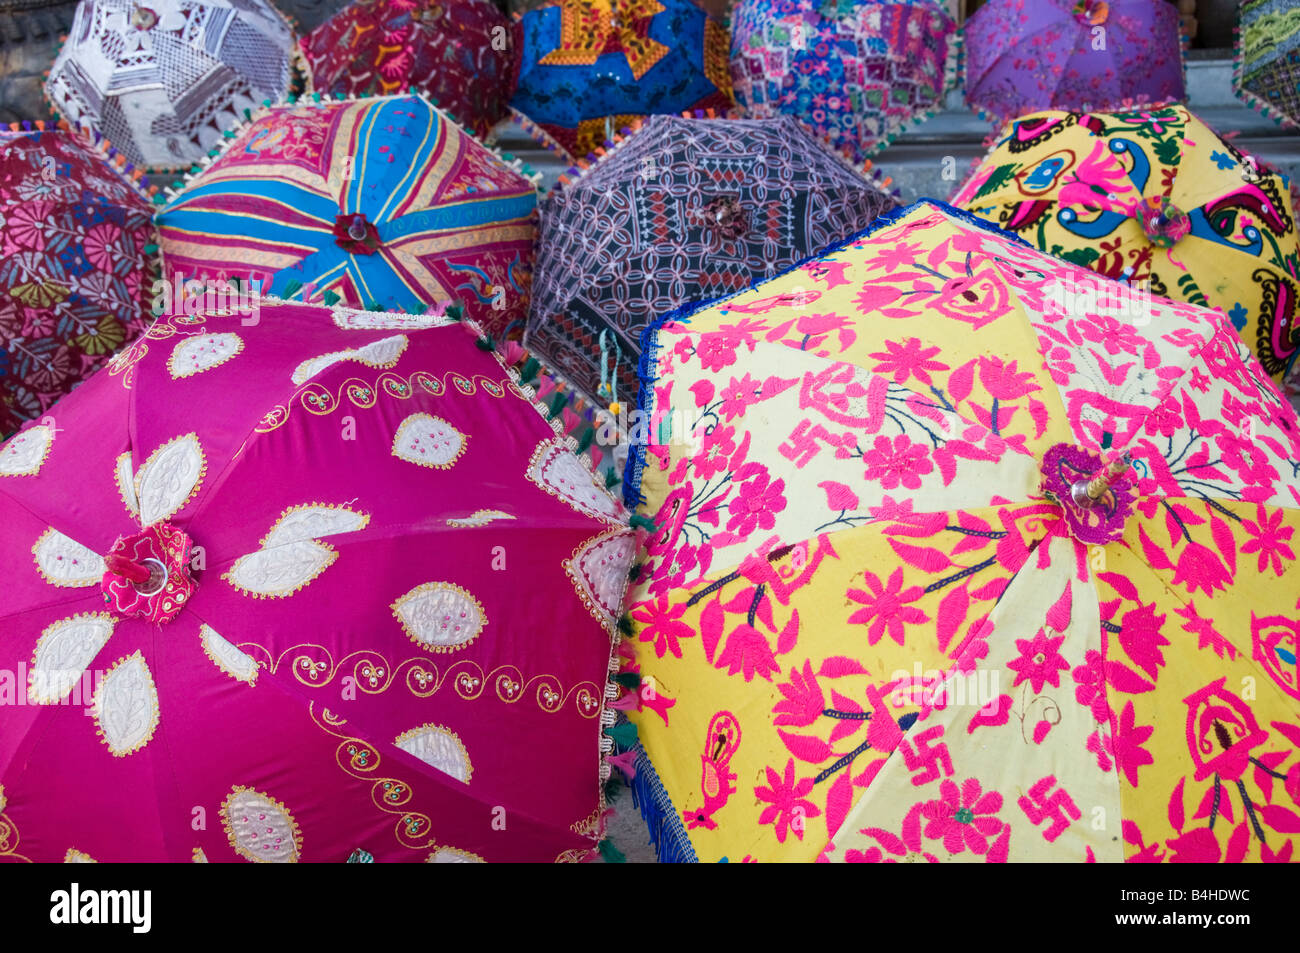 Colourful umbrellas outside a shop in Jaipur Stock Photo